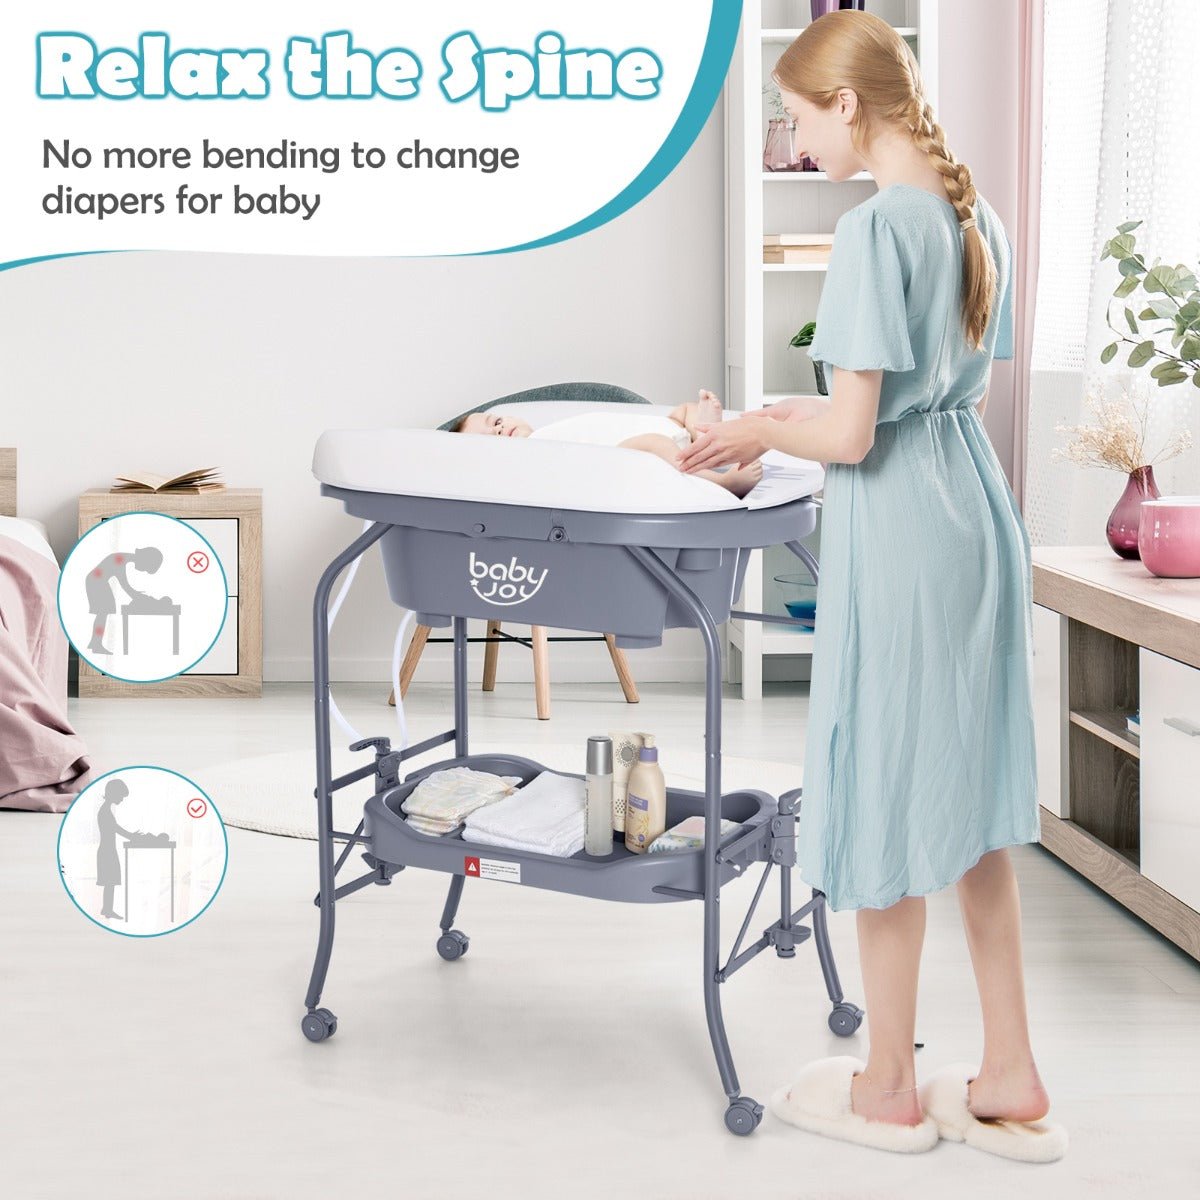 Enhance Baby's Comfort with the 2 in 1 Changing Table - Buy Now!